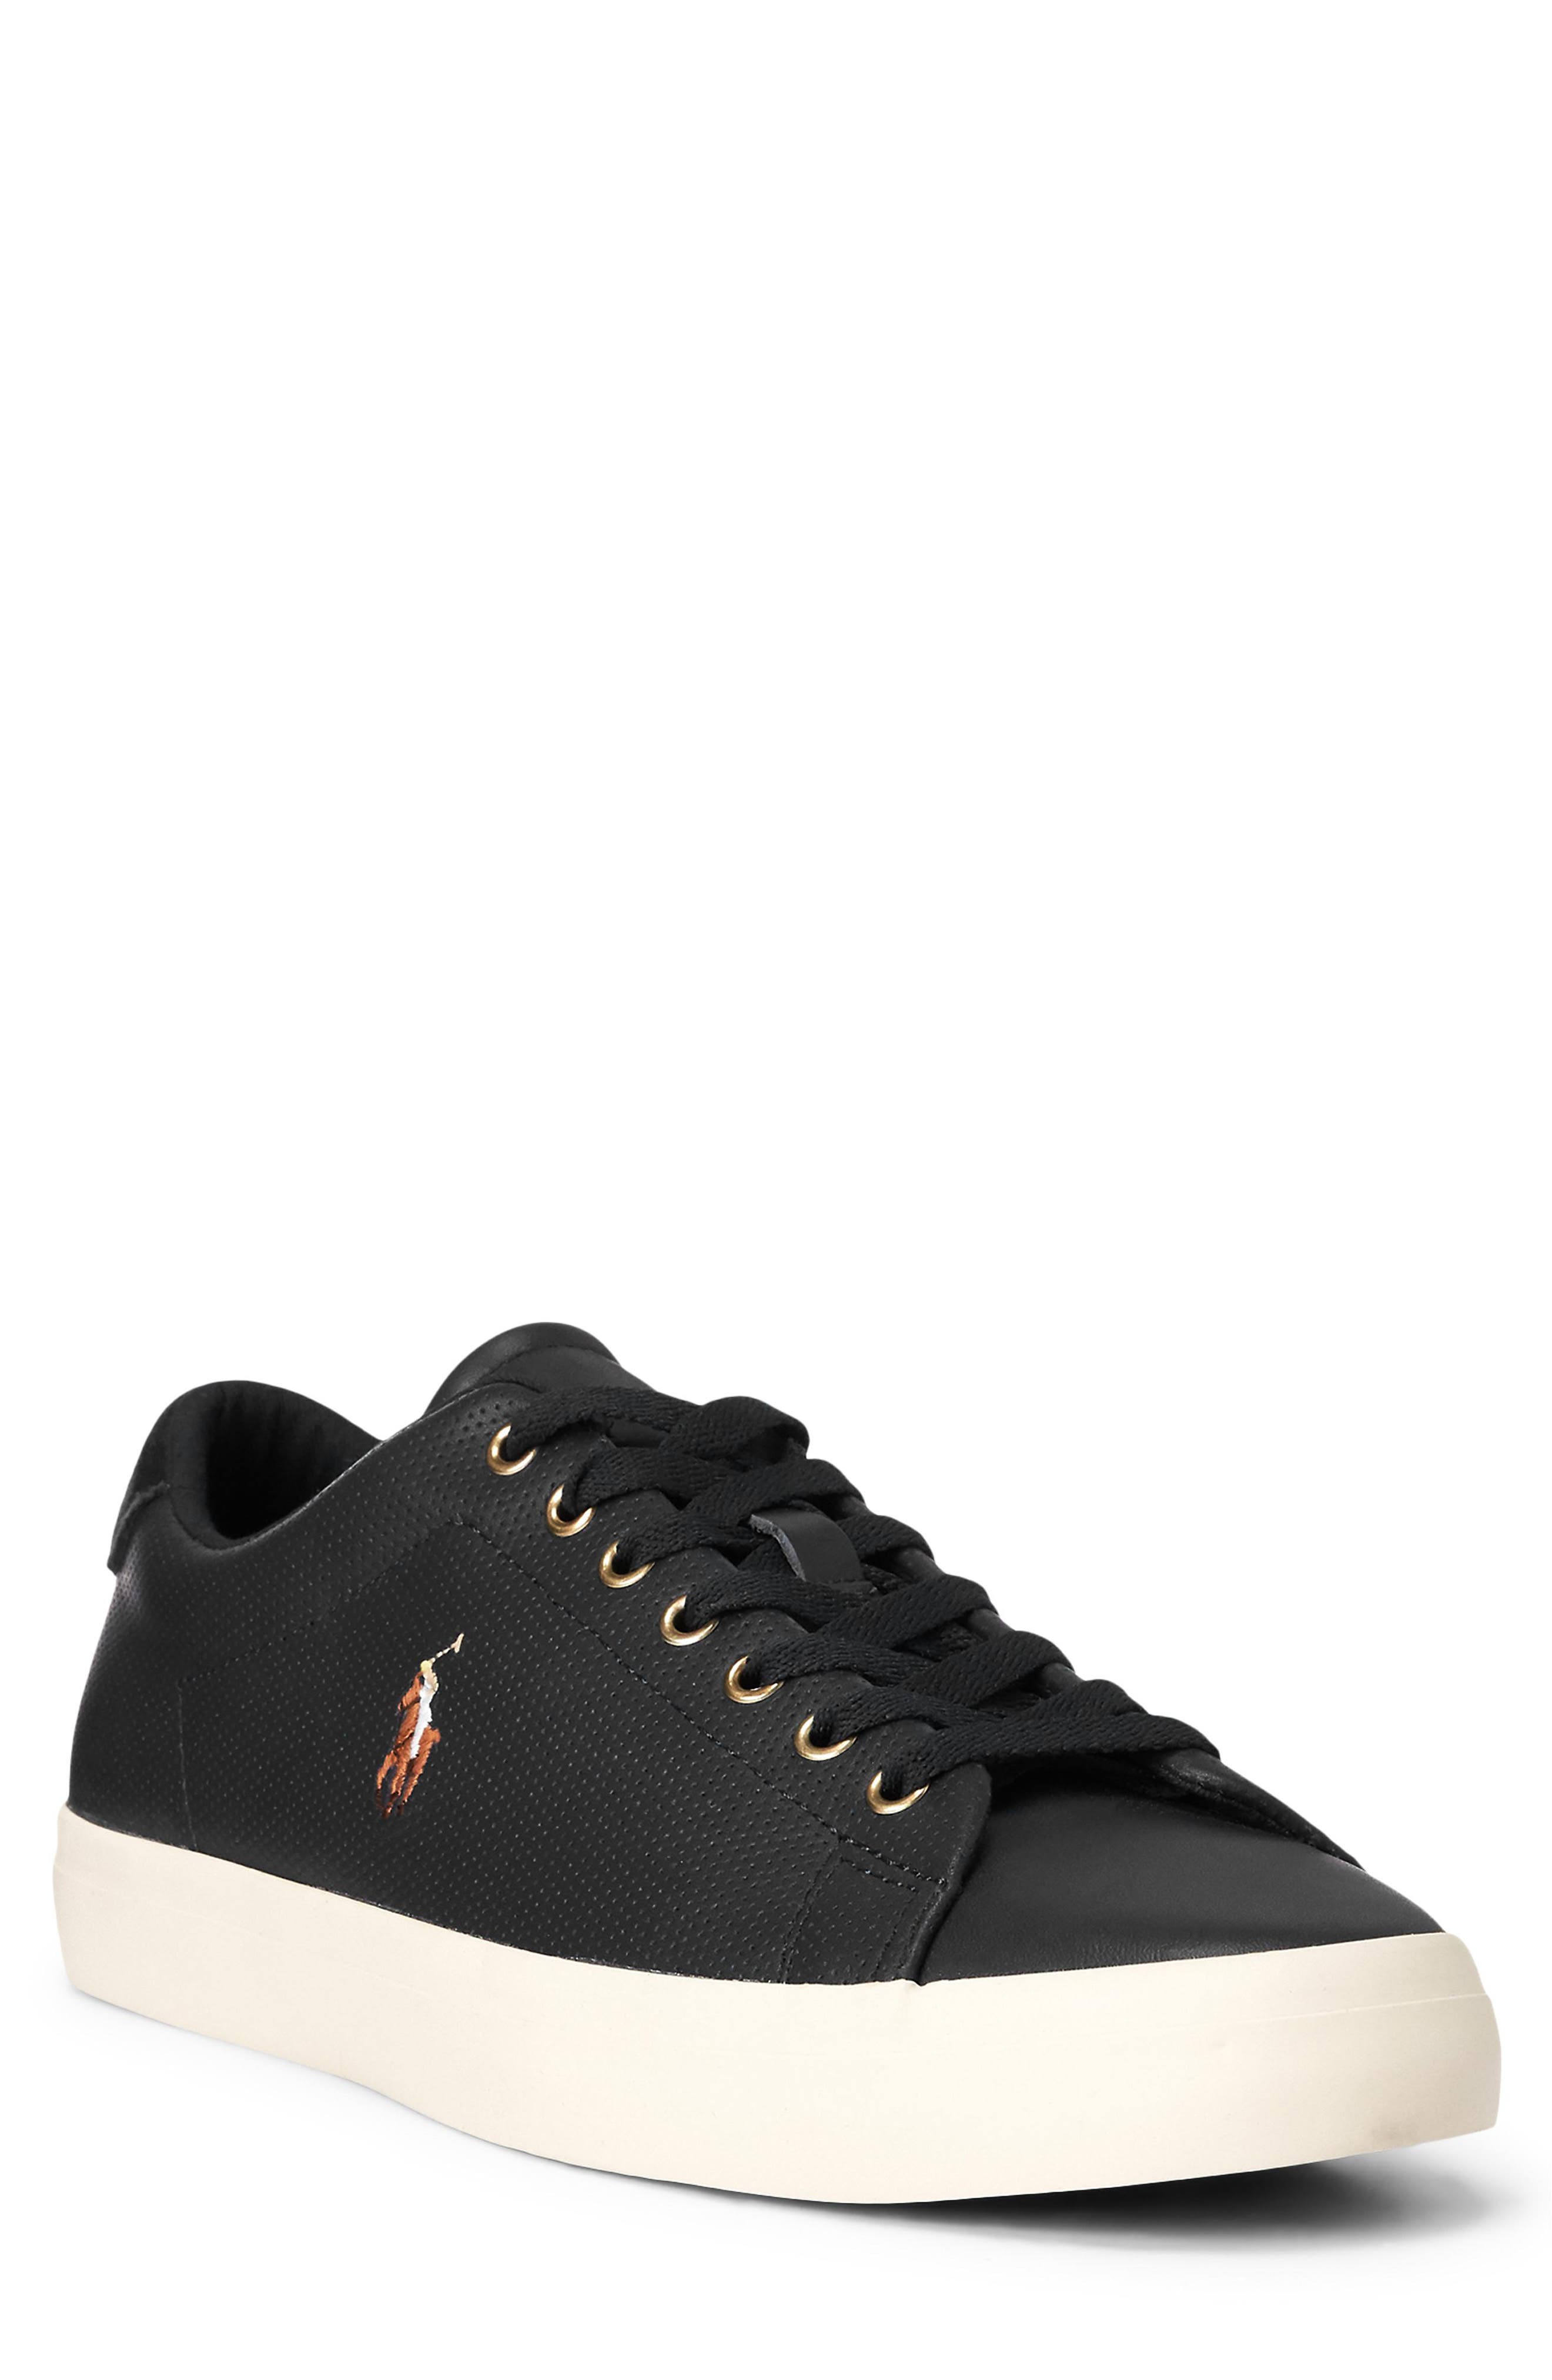 Polo Ralph Lauren Longwood Sneaker, Size 12 In Black Leather At Nordstrom